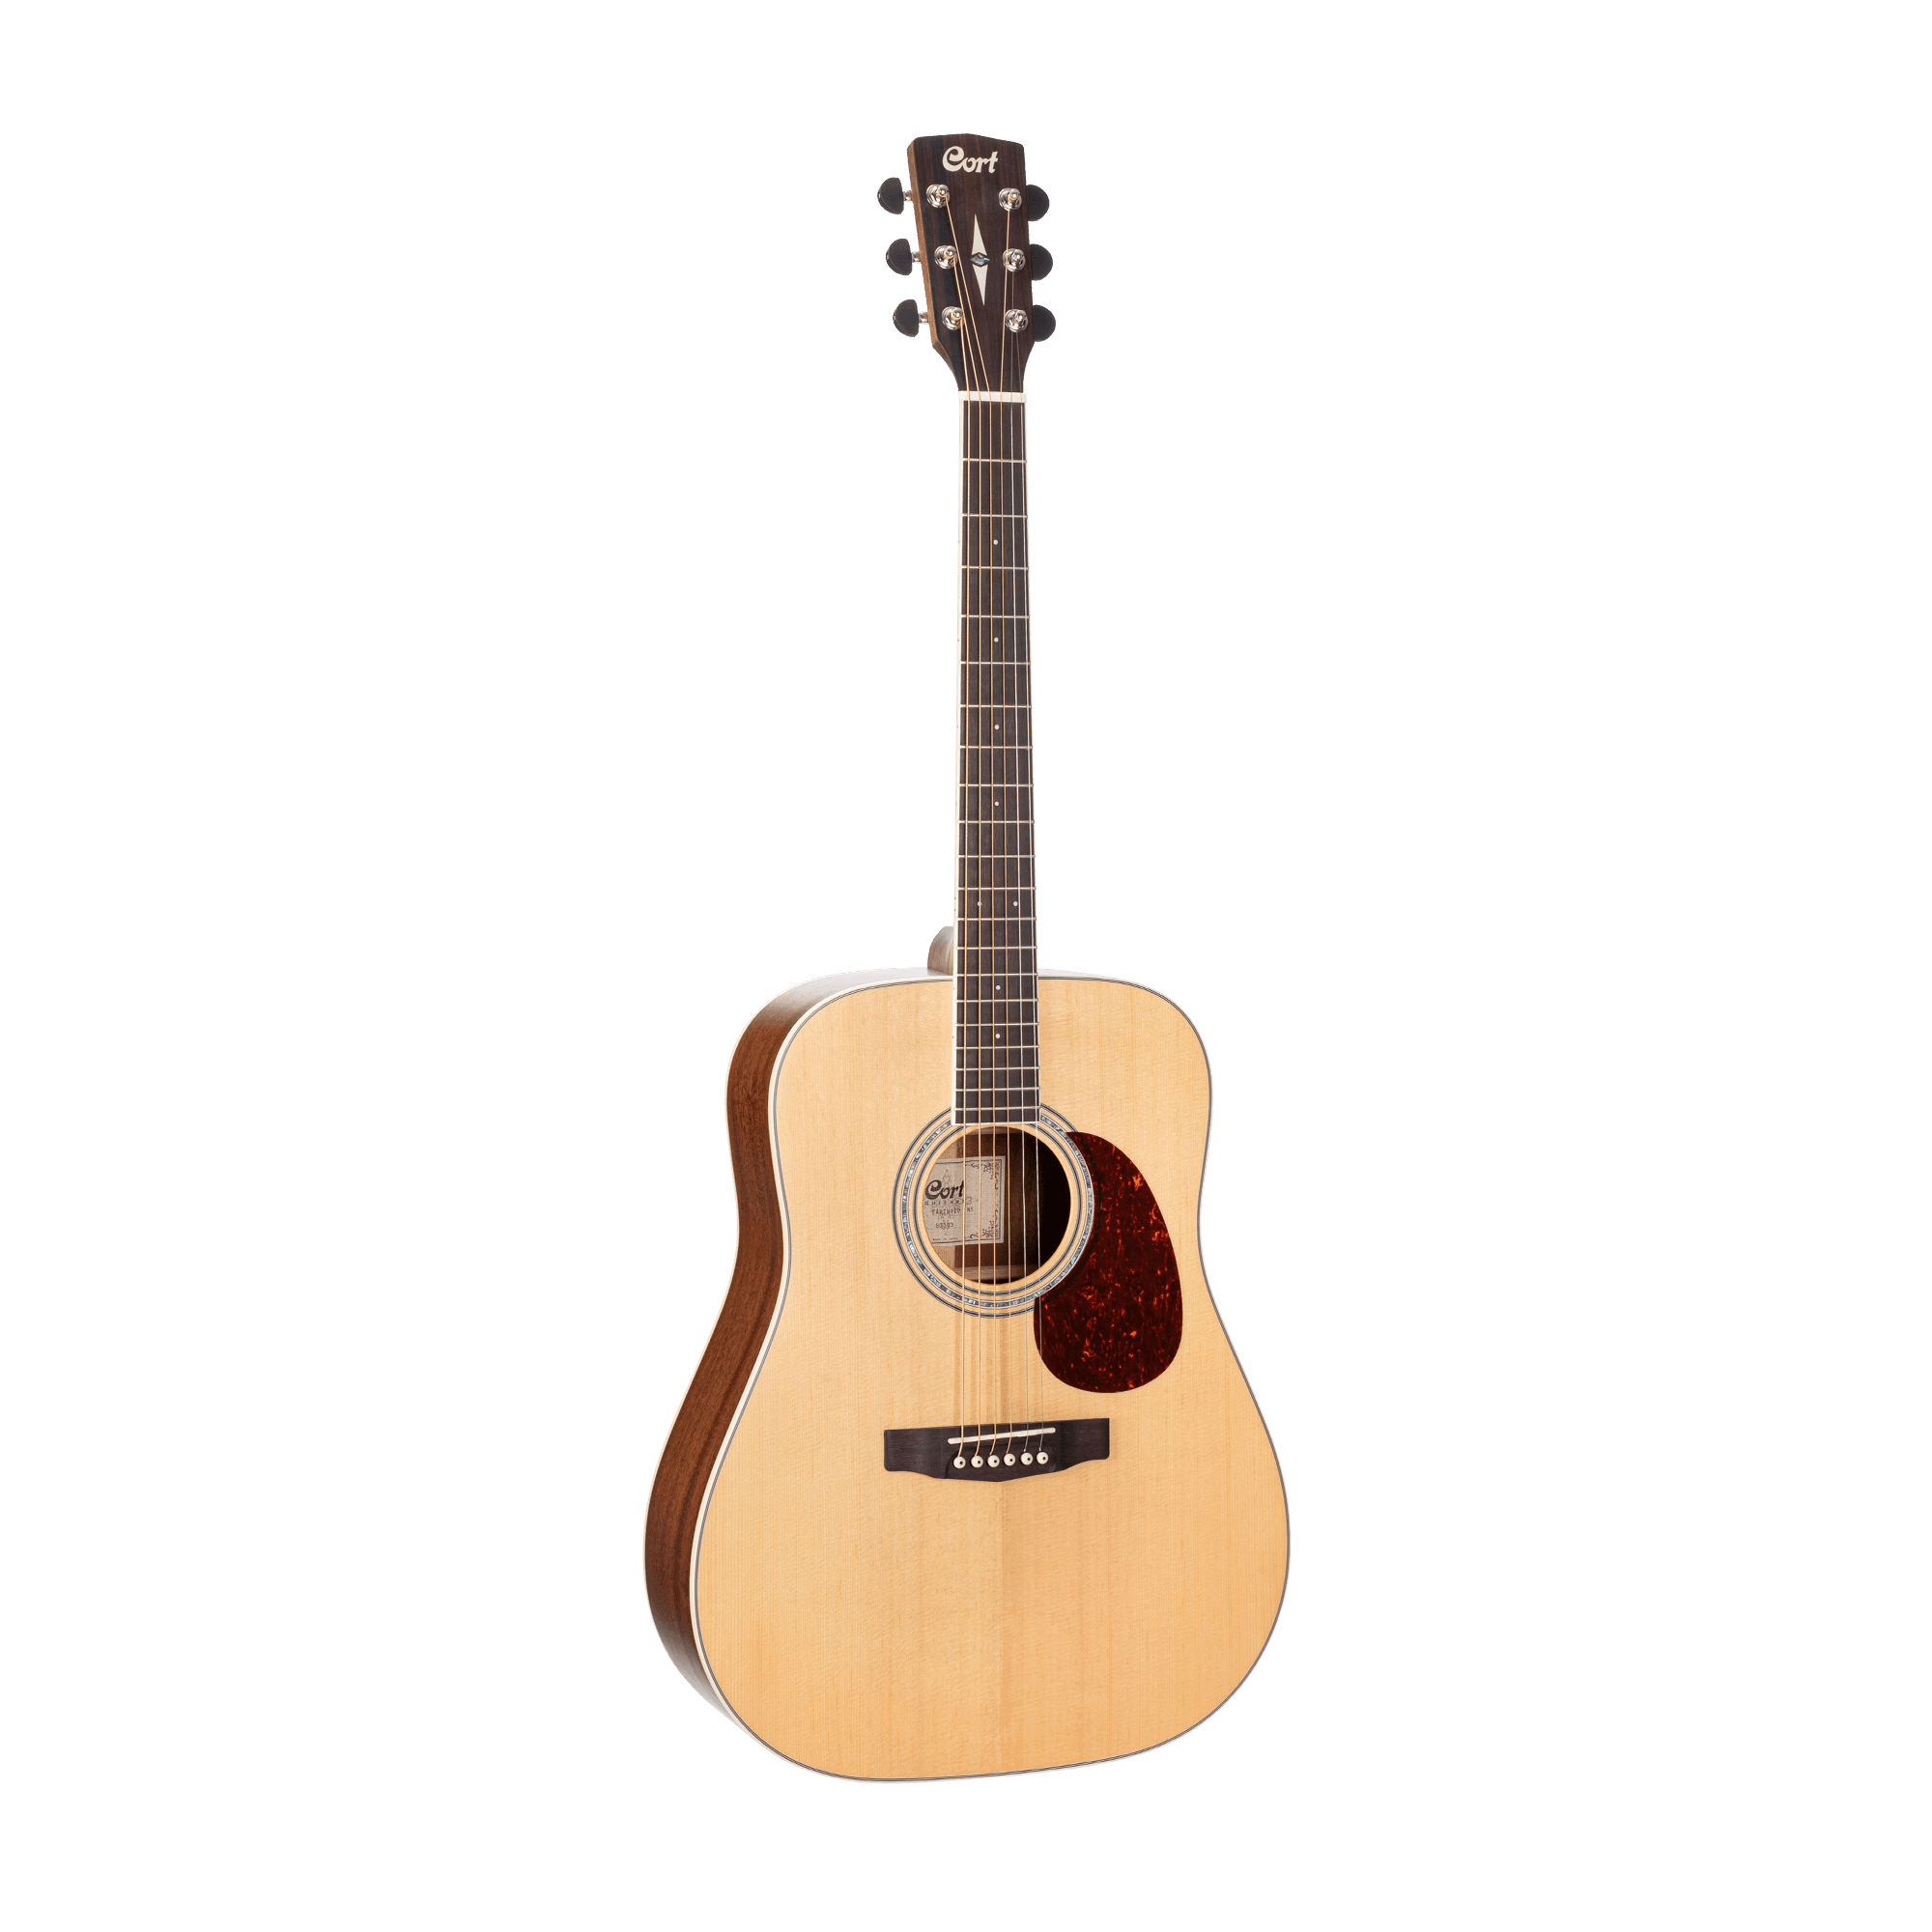 Earth 100 Ns Dreadnought Guitar - Guitars - Electro-Acoustic by Cort at Muso's Stuff